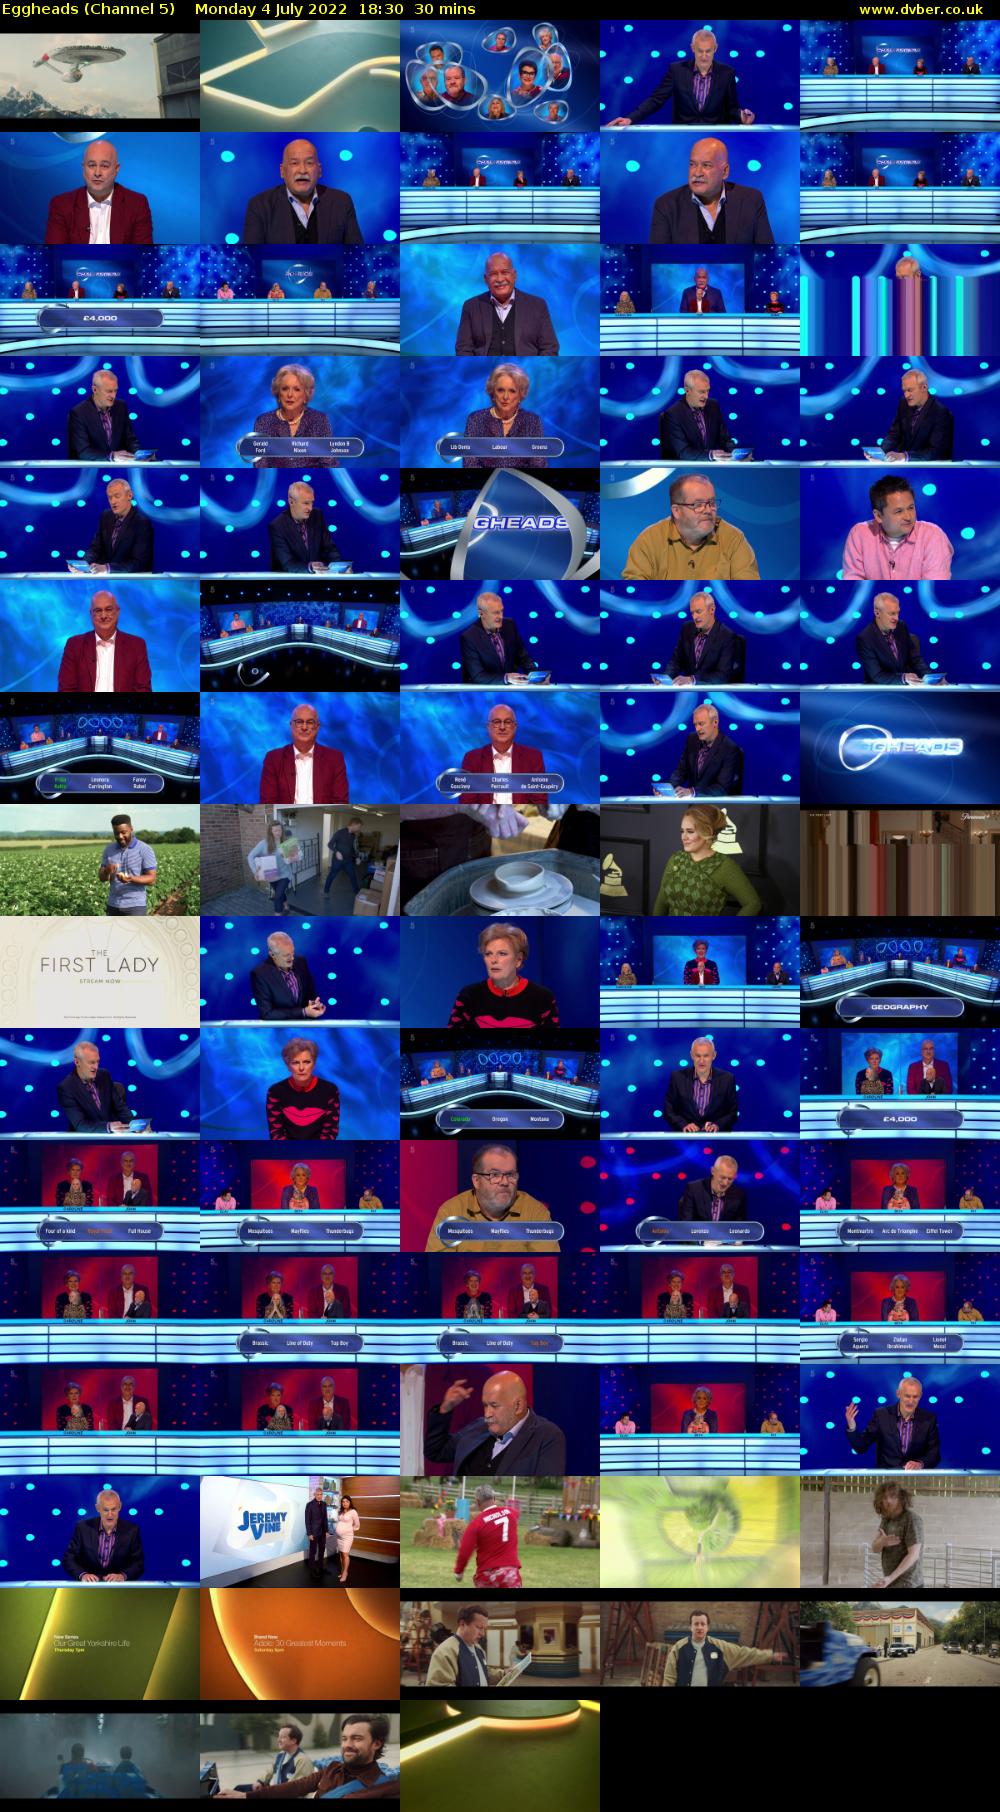 Eggheads (Channel 5) Monday 4 July 2022 18:30 - 19:00